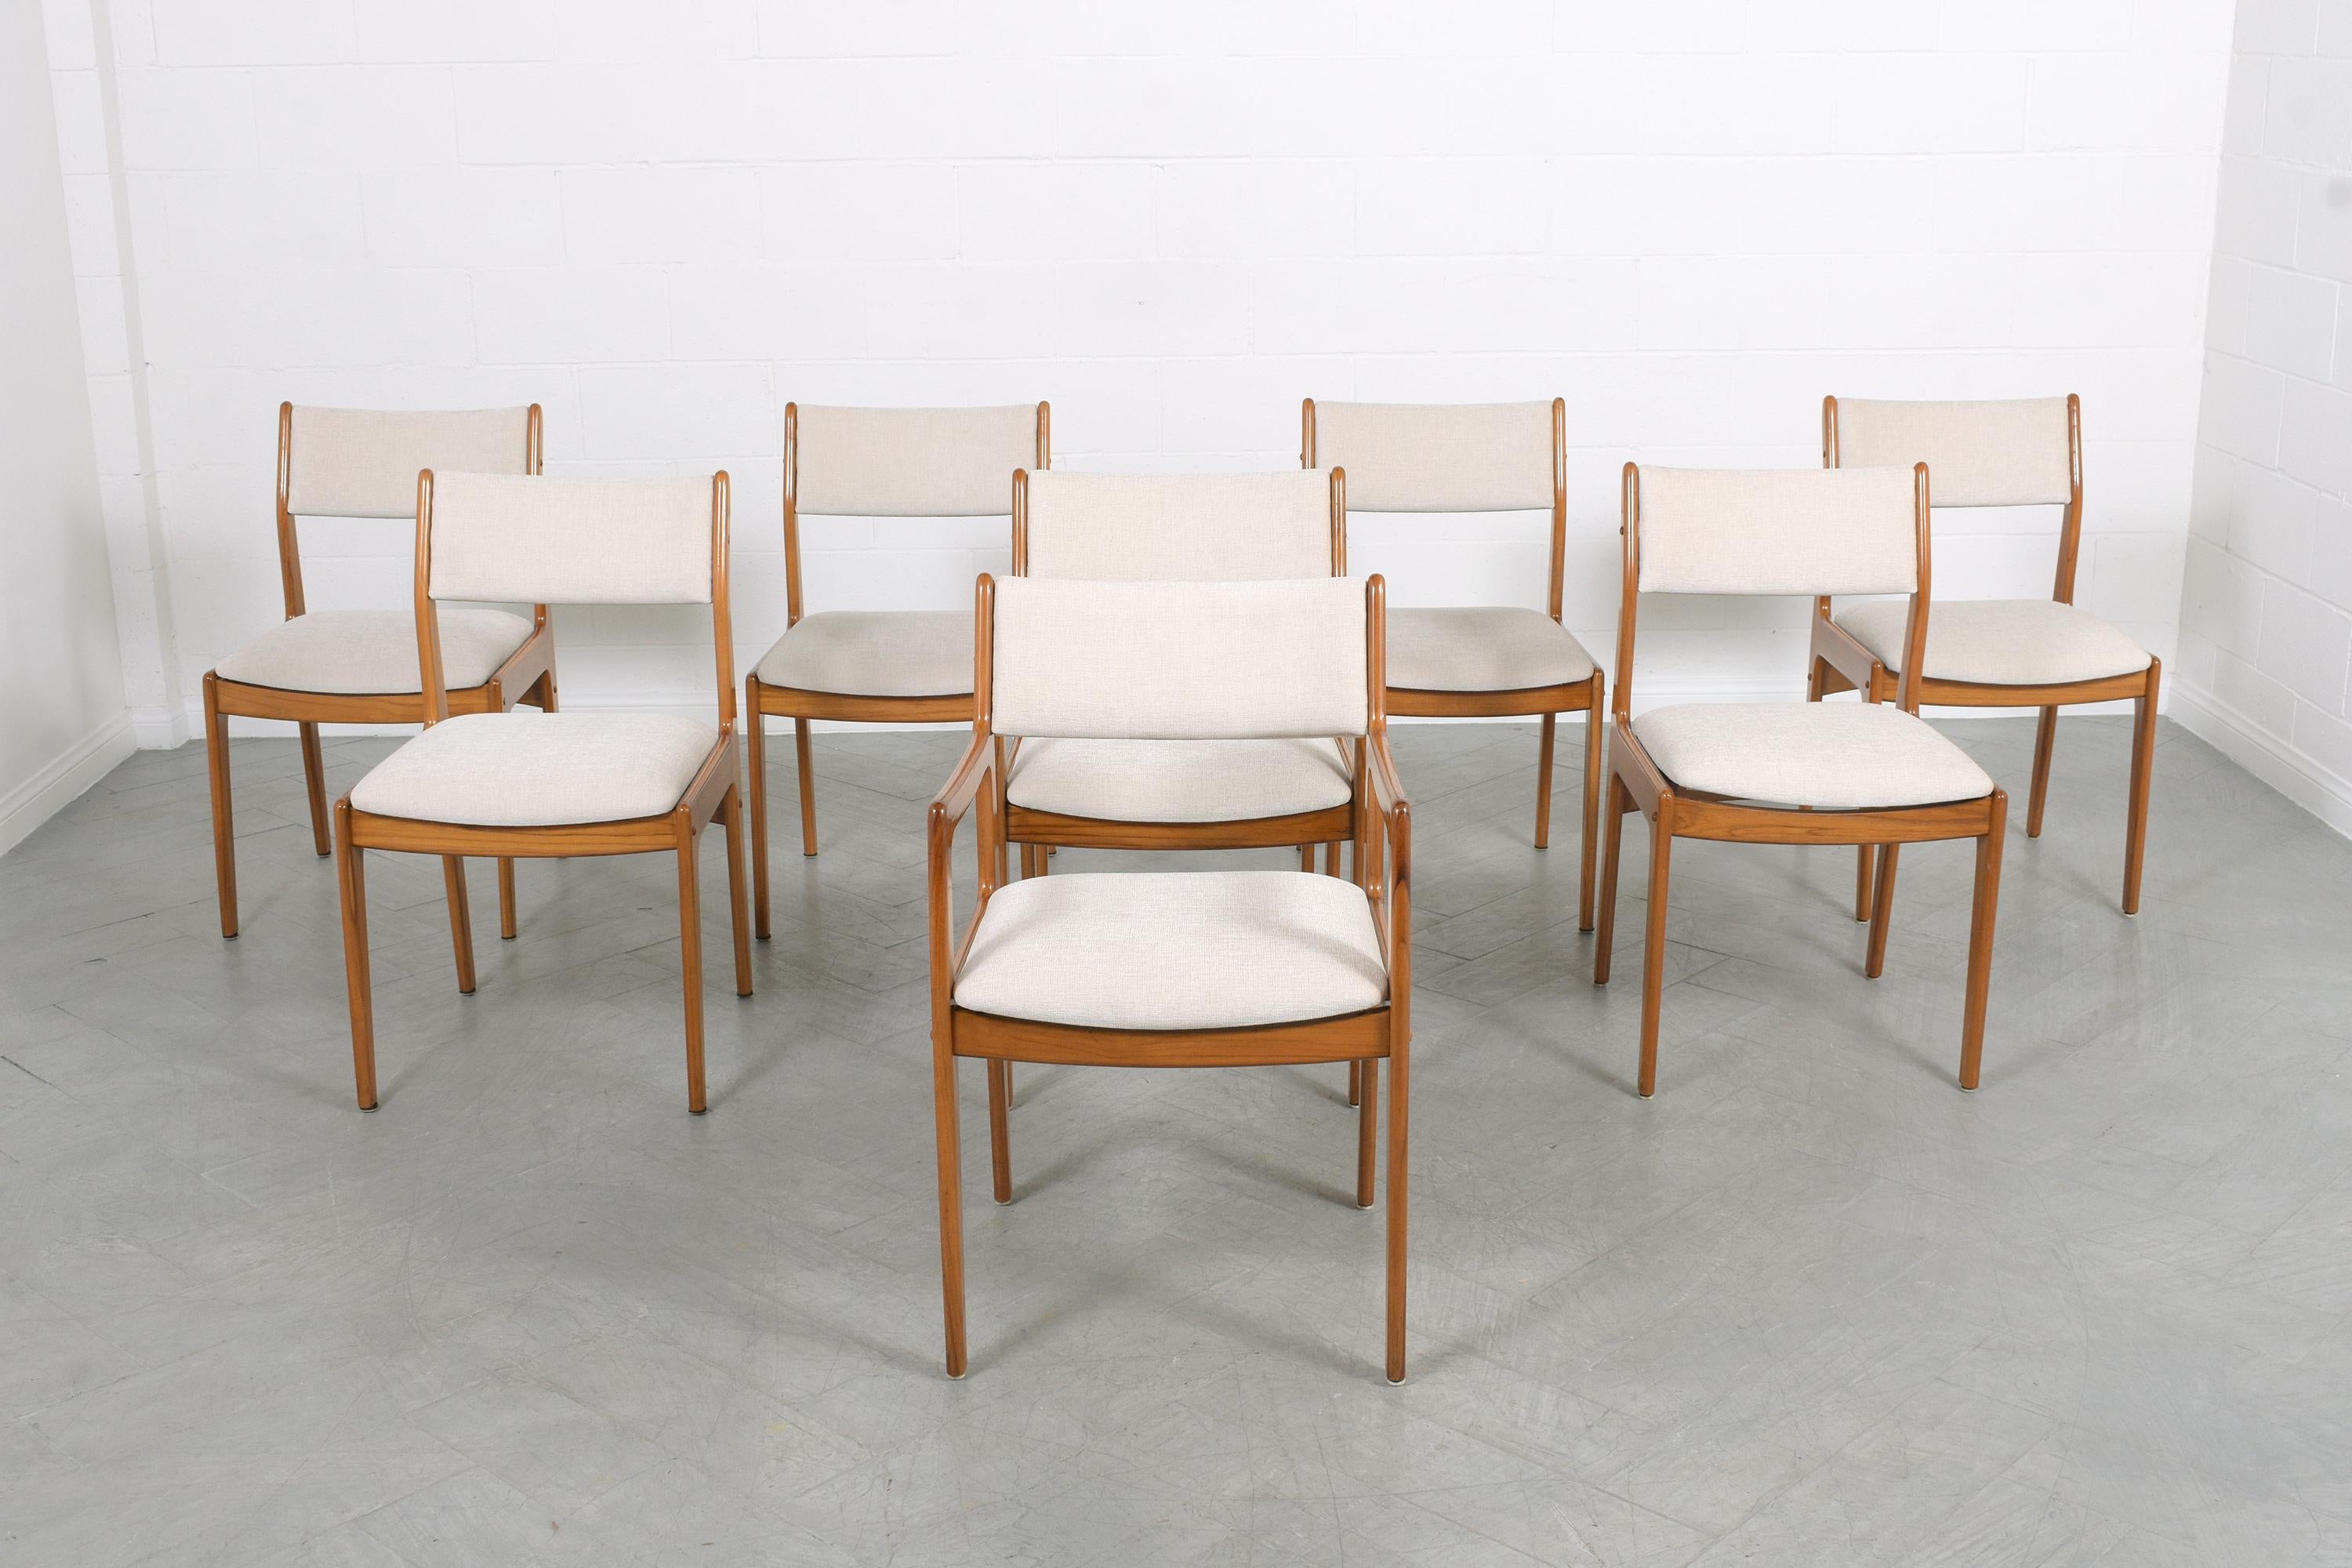 Indulge in the exceptional allure of this extraordinary set of eight Modern Danish dining room chairs. Artisanally handcrafted from robust teak wood, these chairs are preserved in great condition, following complete restoration, refinishing, and